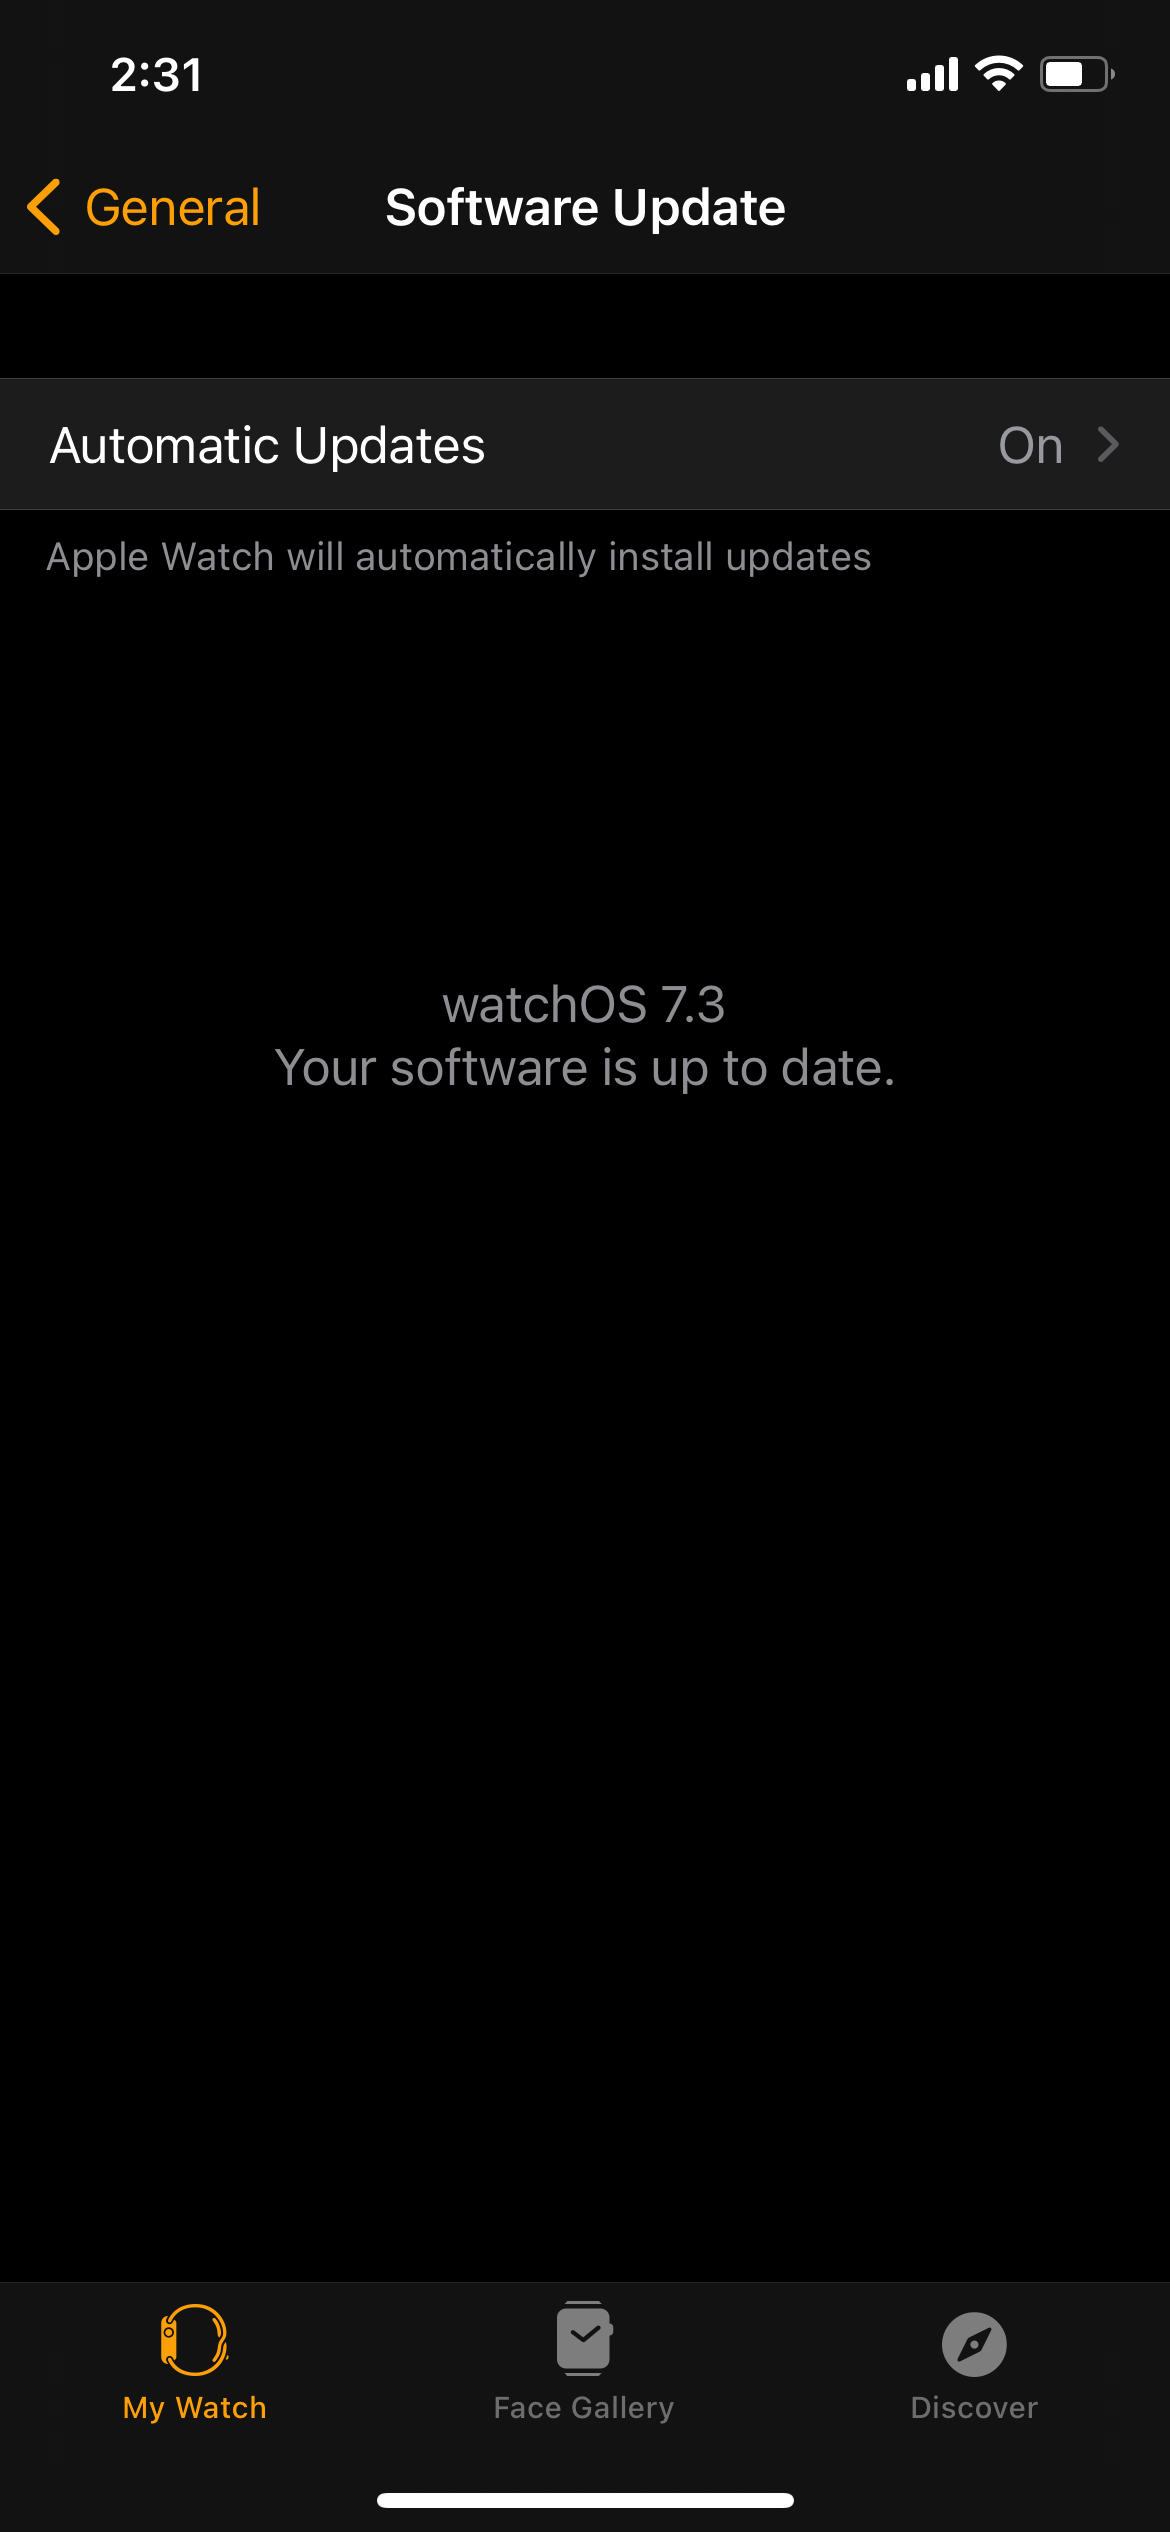 watchOS up to date message.